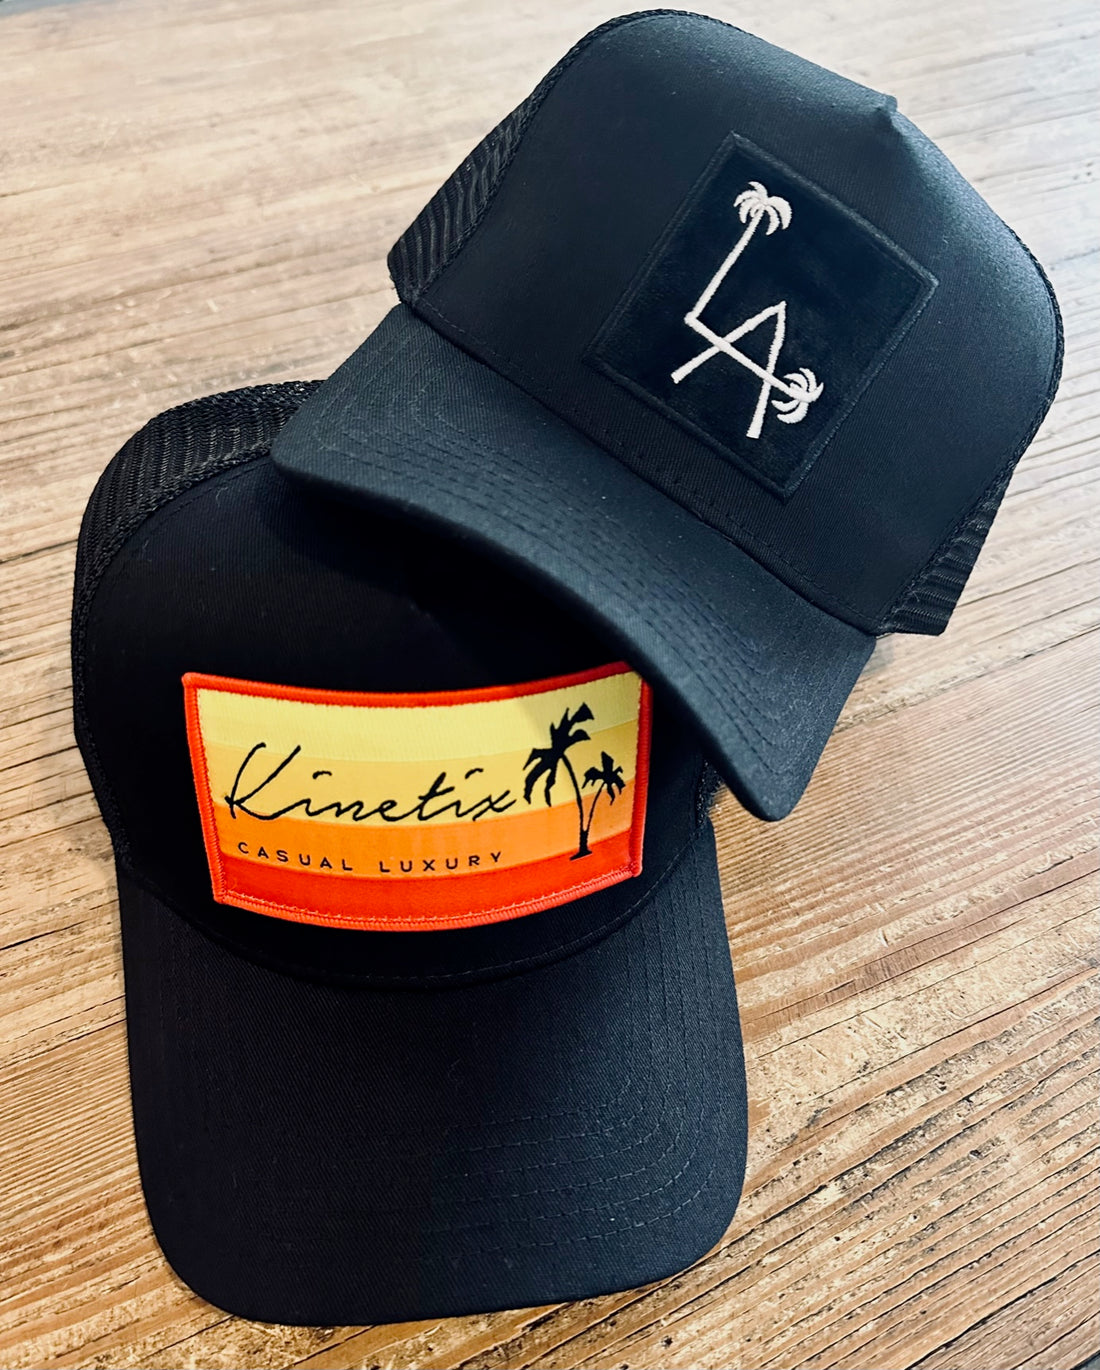 Kinetix Shore Hat (Black) PRE-ORDER NOW, AVAILABLE MAY 15th